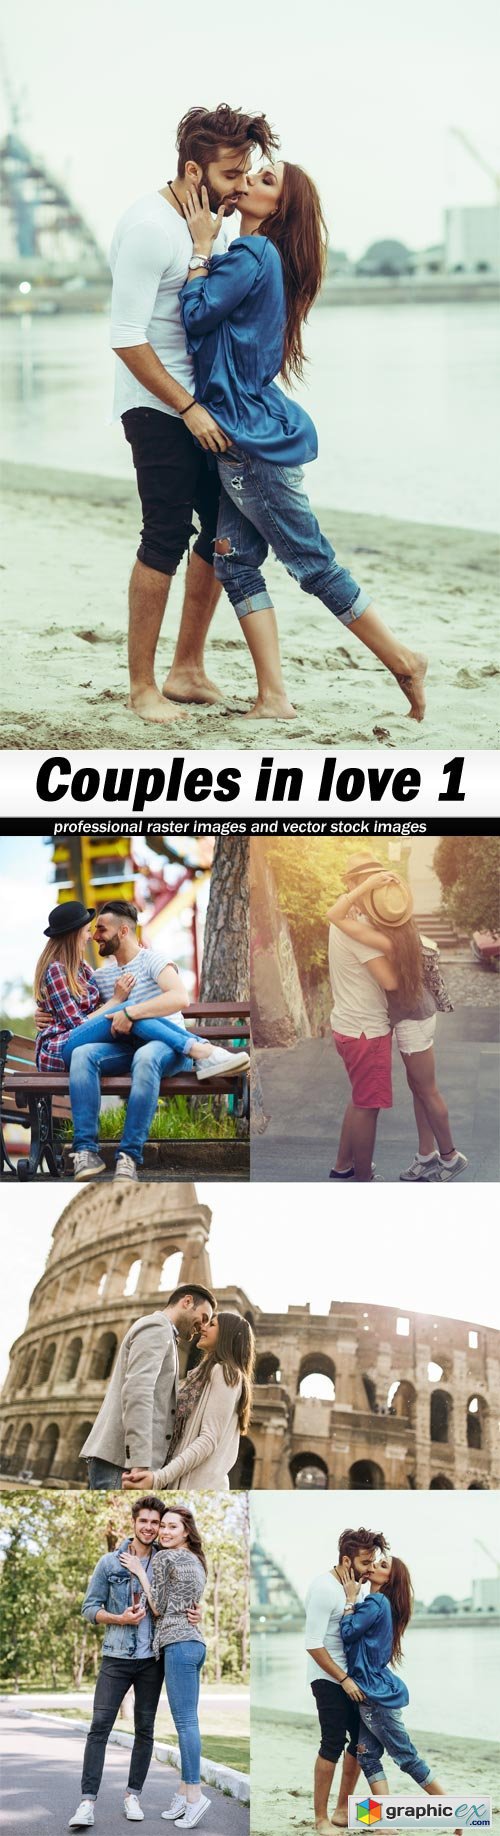 Couples in love 1 - 5 UHQ JPEG